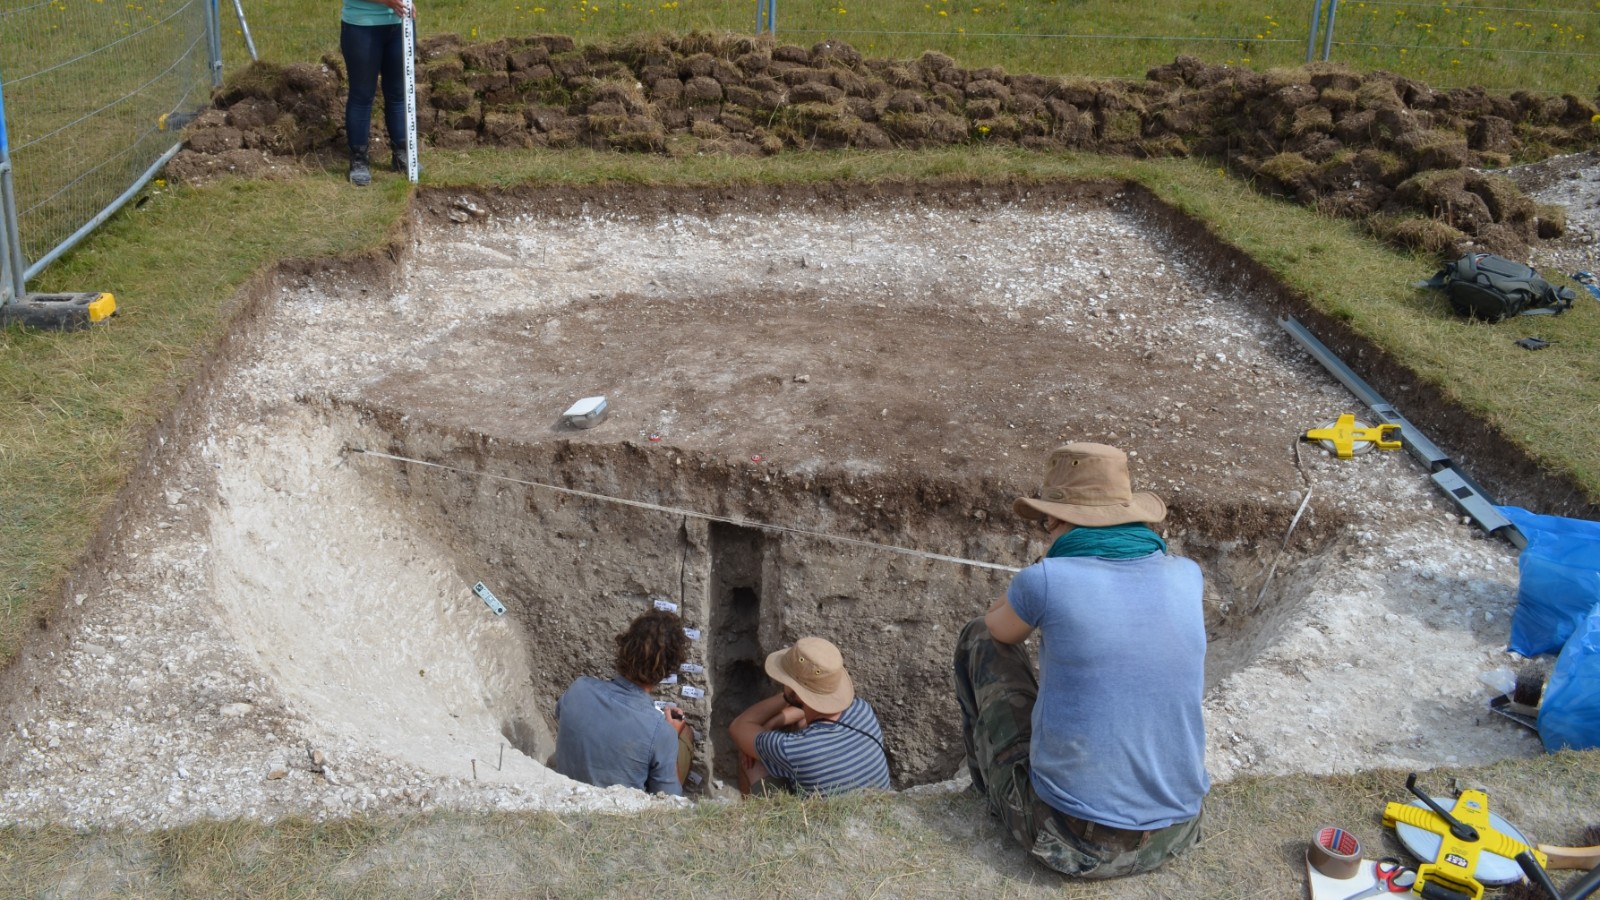 In this image we see a large square piece of grass that has been dug up to reveal a 10,000-year-old pit. Inside the pit are 2 archaeologists taking samples. There are 2 more archaeologists outside the pit, on opposite sides, taking measurements. Several tools are strewn about the site.